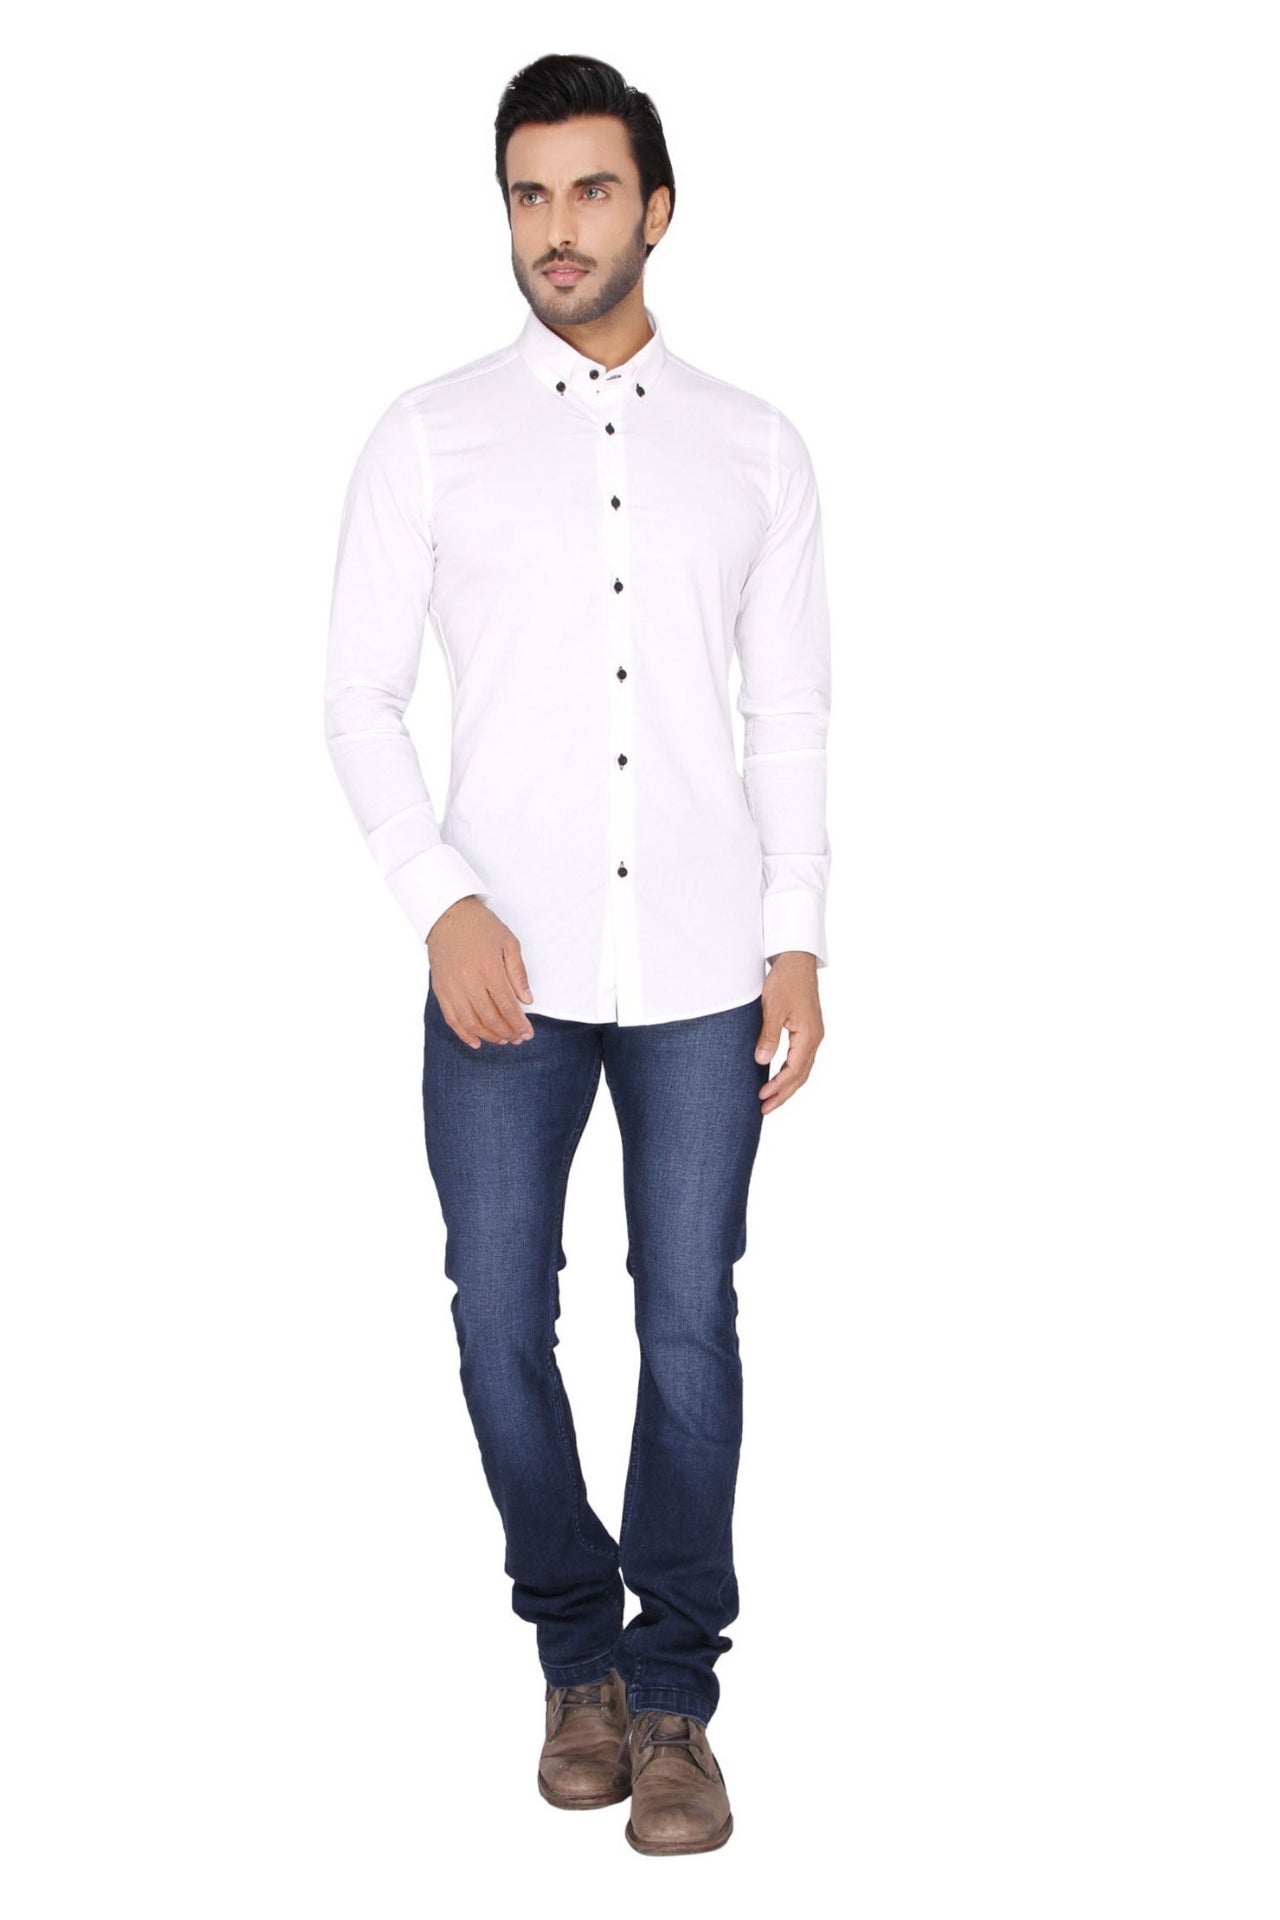 White Semi-formal Shirt with Button down Collar